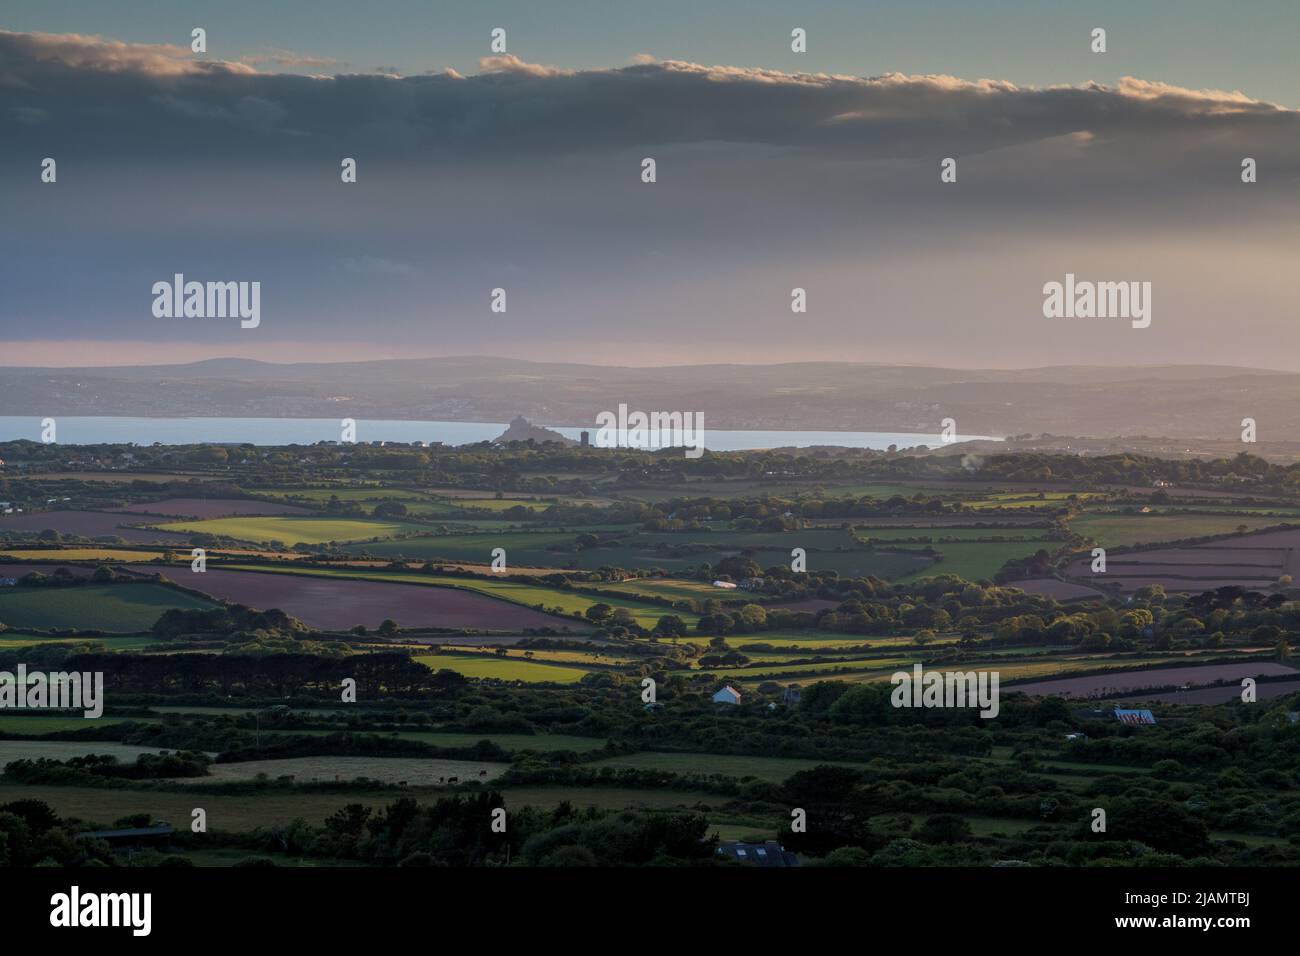 Views from Tregonning Hill in West Cornwall, England. Images taken just before or at sunset in late May Stock Photo